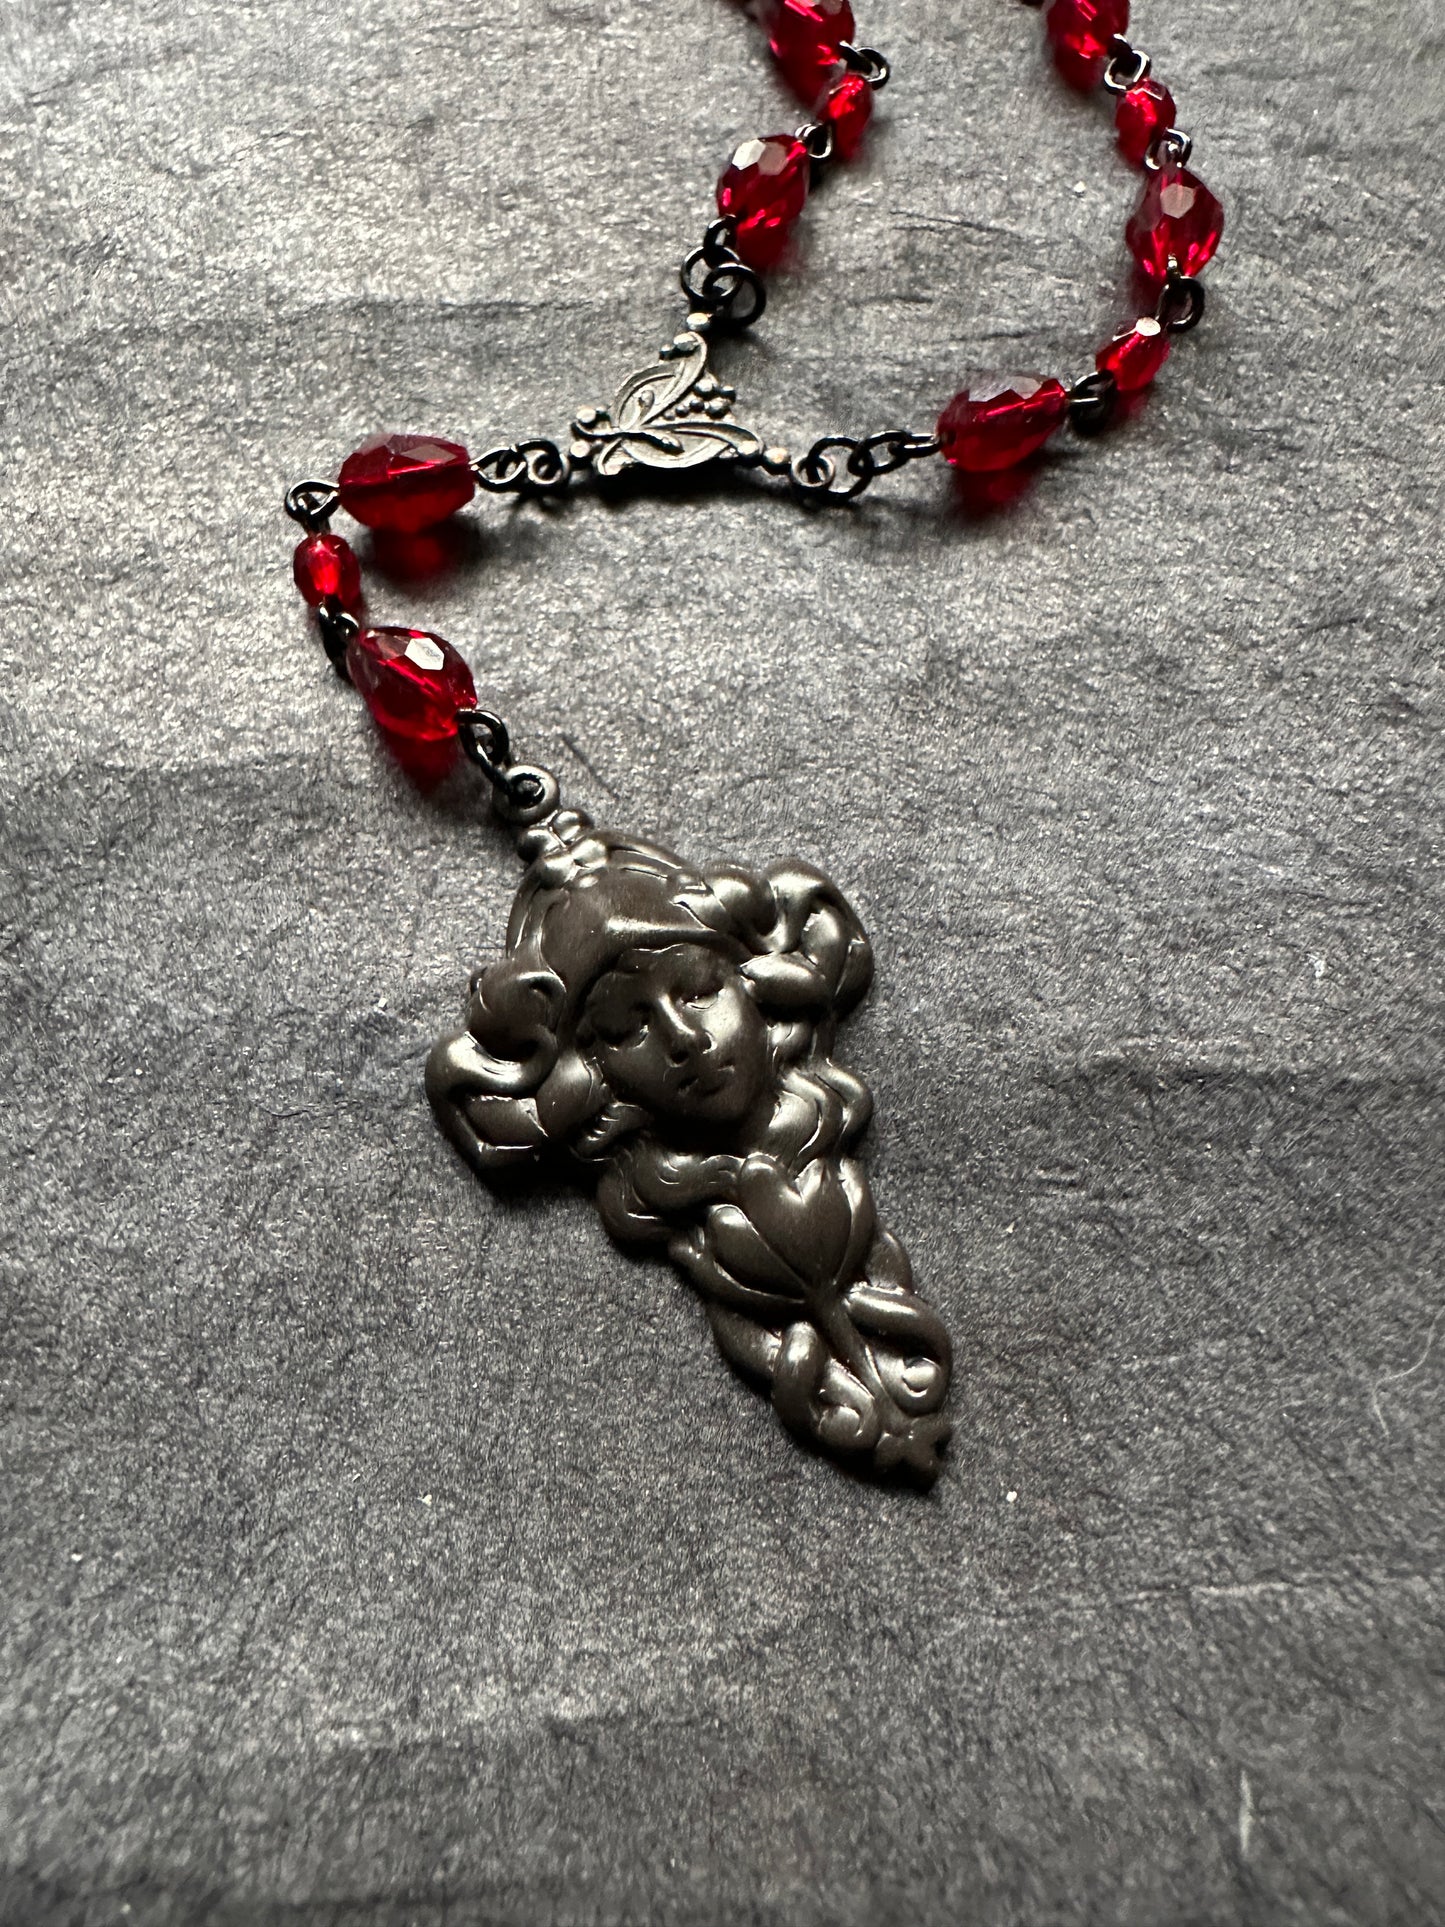 Dark Persephone necklace with red glass beads